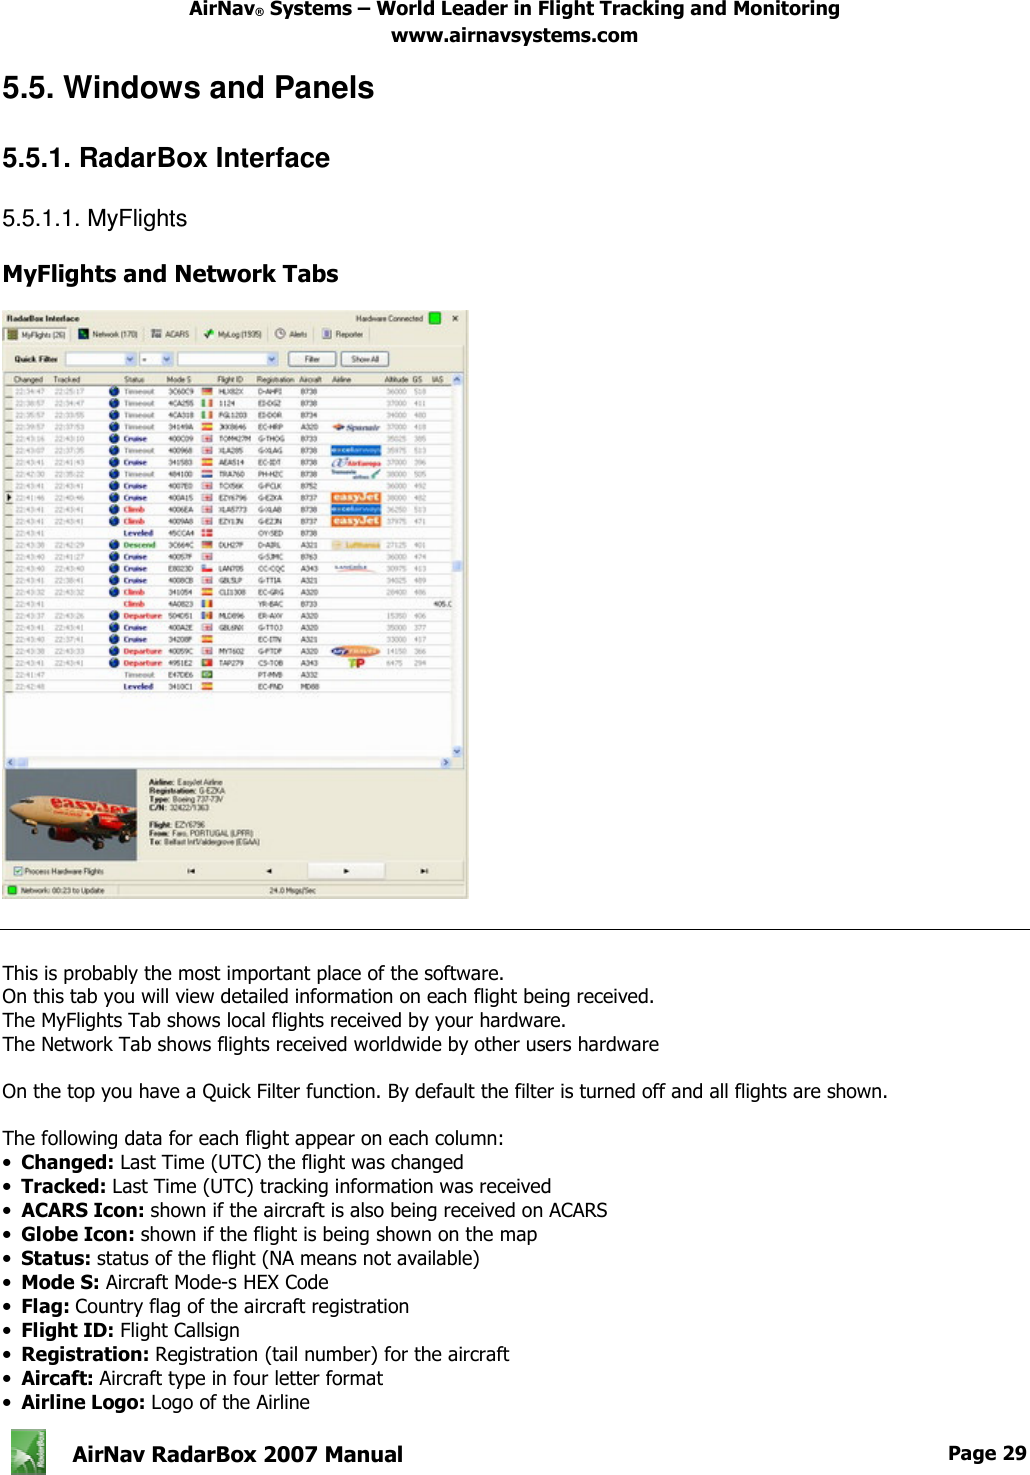 AirNav® Systems – World Leader in Flight Tracking and Monitoring www.airnavsystems.com   AirNav RadarBox 2007 Manual  Page 29      5.5. Windows and Panels  5.5.1. RadarBox Interface  5.5.1.1. MyFlights  MyFlights and Network Tabs       This is probably the most important place of the software. On this tab you will view detailed information on each flight being received. The MyFlights Tab shows local flights received by your hardware. The Network Tab shows flights received worldwide by other users hardware  On the top you have a Quick Filter function. By default the filter is turned off and all flights are shown.  The following data for each flight appear on each column: •  Changed: Last Time (UTC) the flight was changed •  Tracked: Last Time (UTC) tracking information was received •  ACARS Icon: shown if the aircraft is also being received on ACARS •  Globe Icon: shown if the flight is being shown on the map •  Status: status of the flight (NA means not available) •  Mode S: Aircraft Mode-s HEX Code •  Flag: Country flag of the aircraft registration •  Flight ID: Flight Callsign •  Registration: Registration (tail number) for the aircraft •  Aircaft: Aircraft type in four letter format •  Airline Logo: Logo of the Airline 